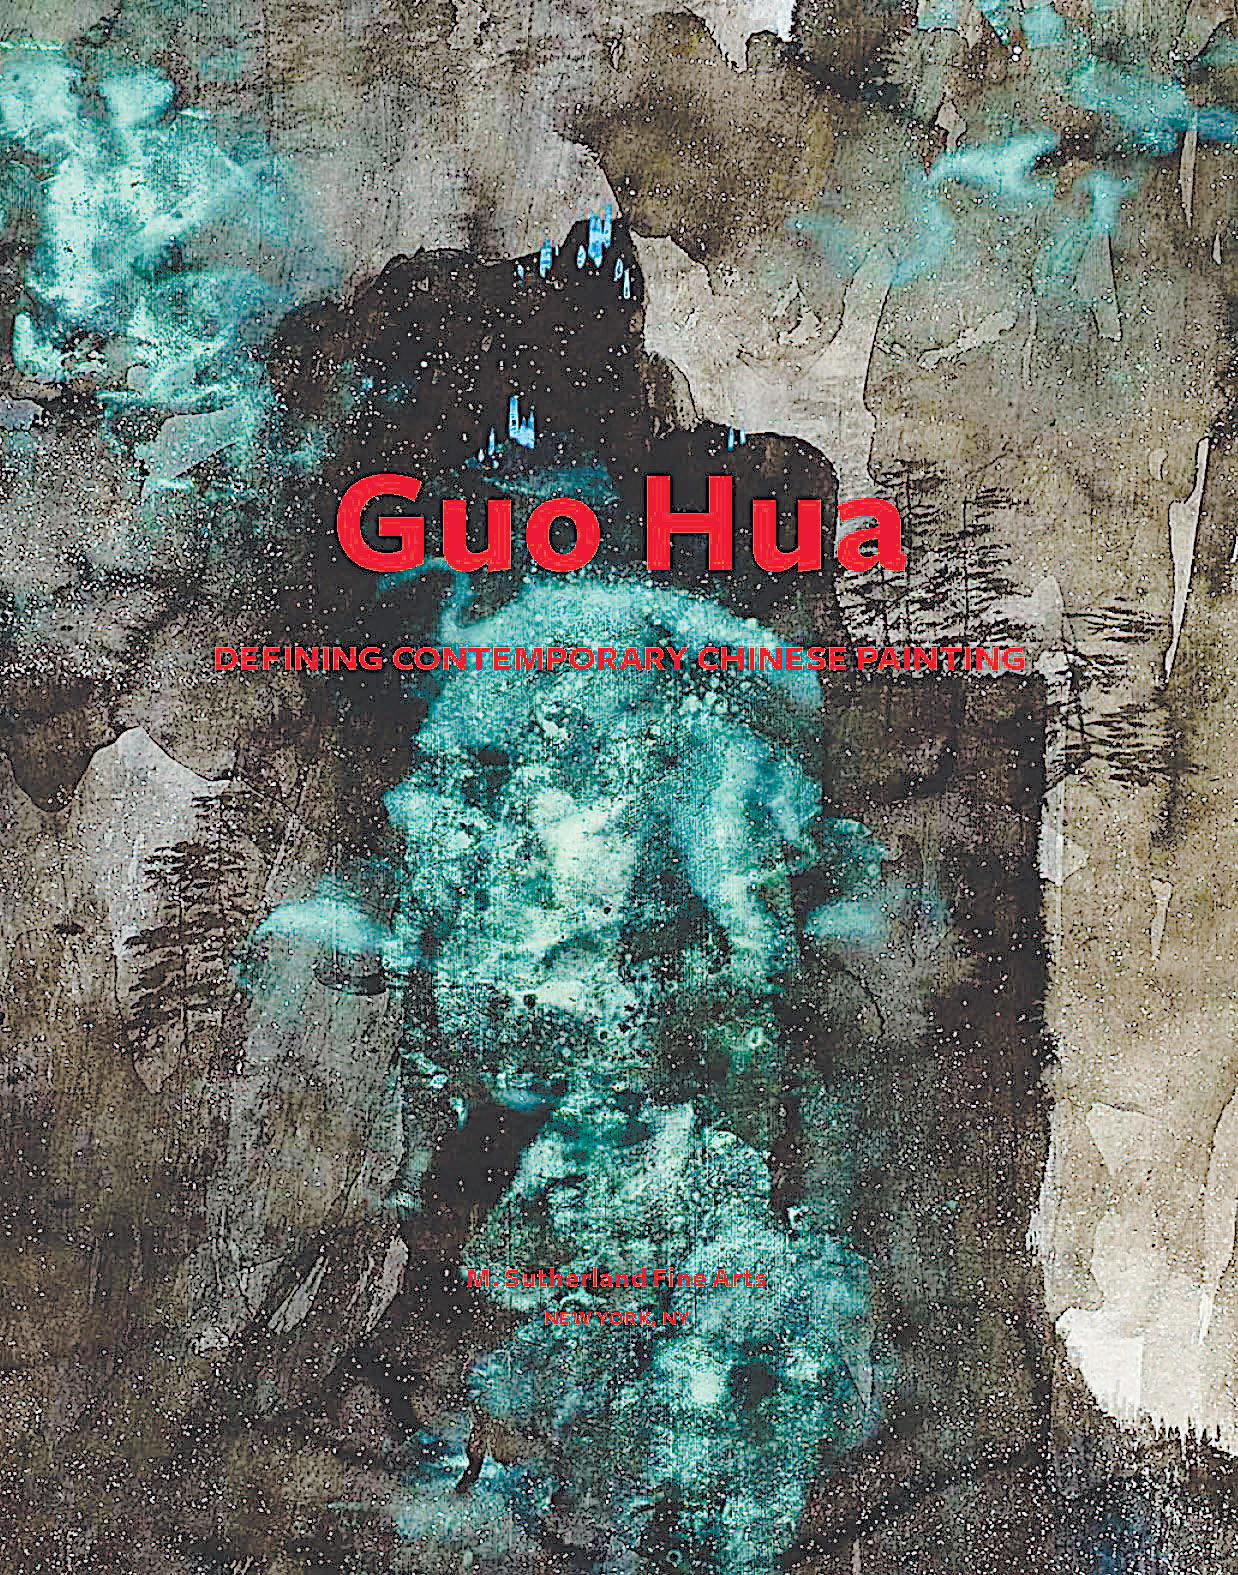 “Guo Hua” catalog now available